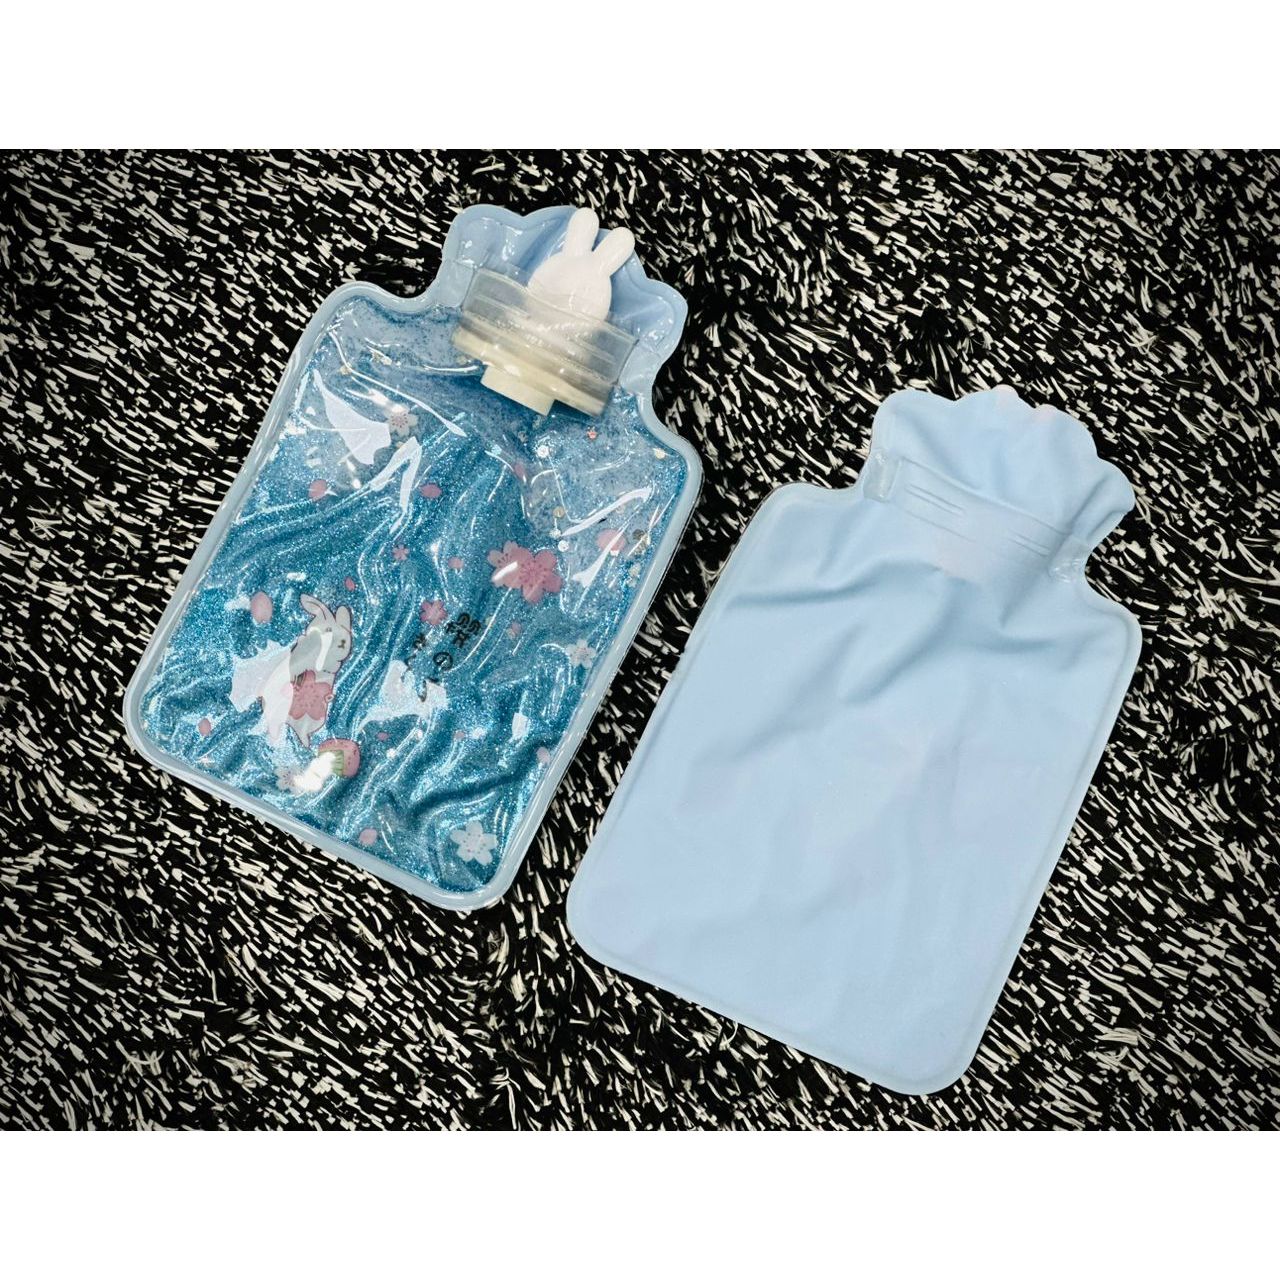 Transparent Hot And Cool Water Bottle | 4 Pieces Set